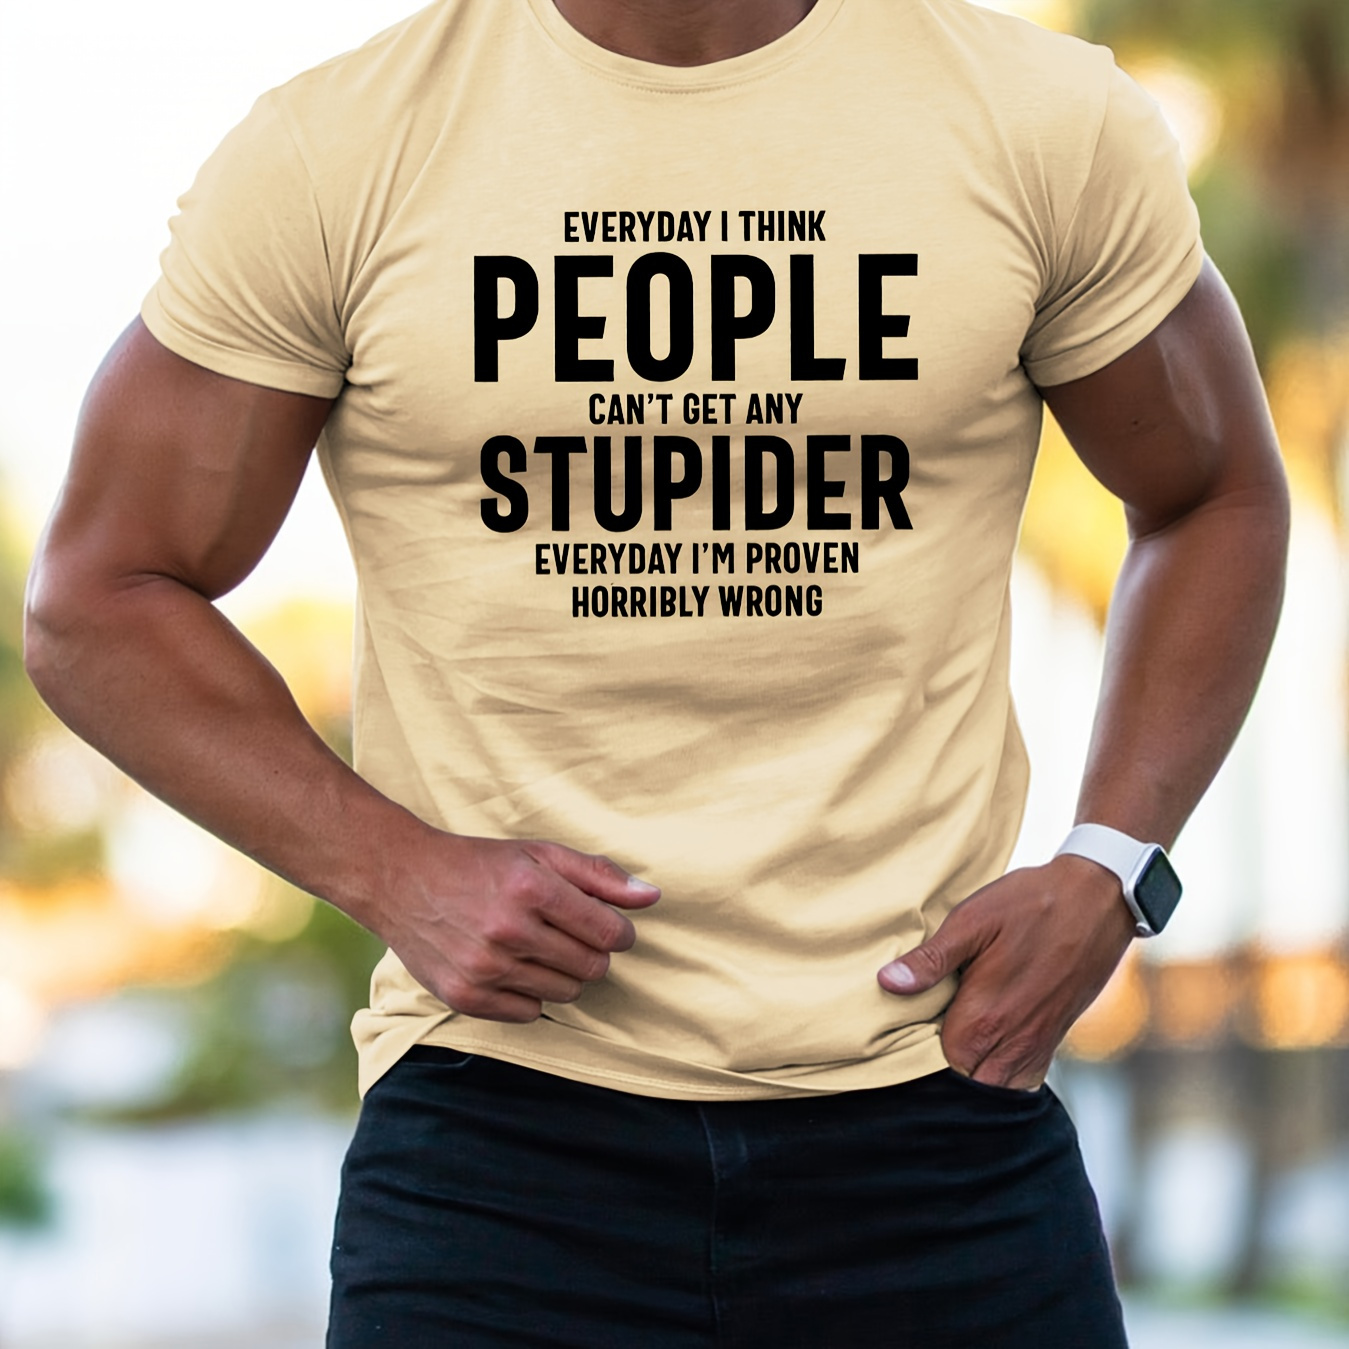 

Everyday I Think People... Print T Shirt, Tees For Men, Casual Short Sleeve T-shirt For Summer